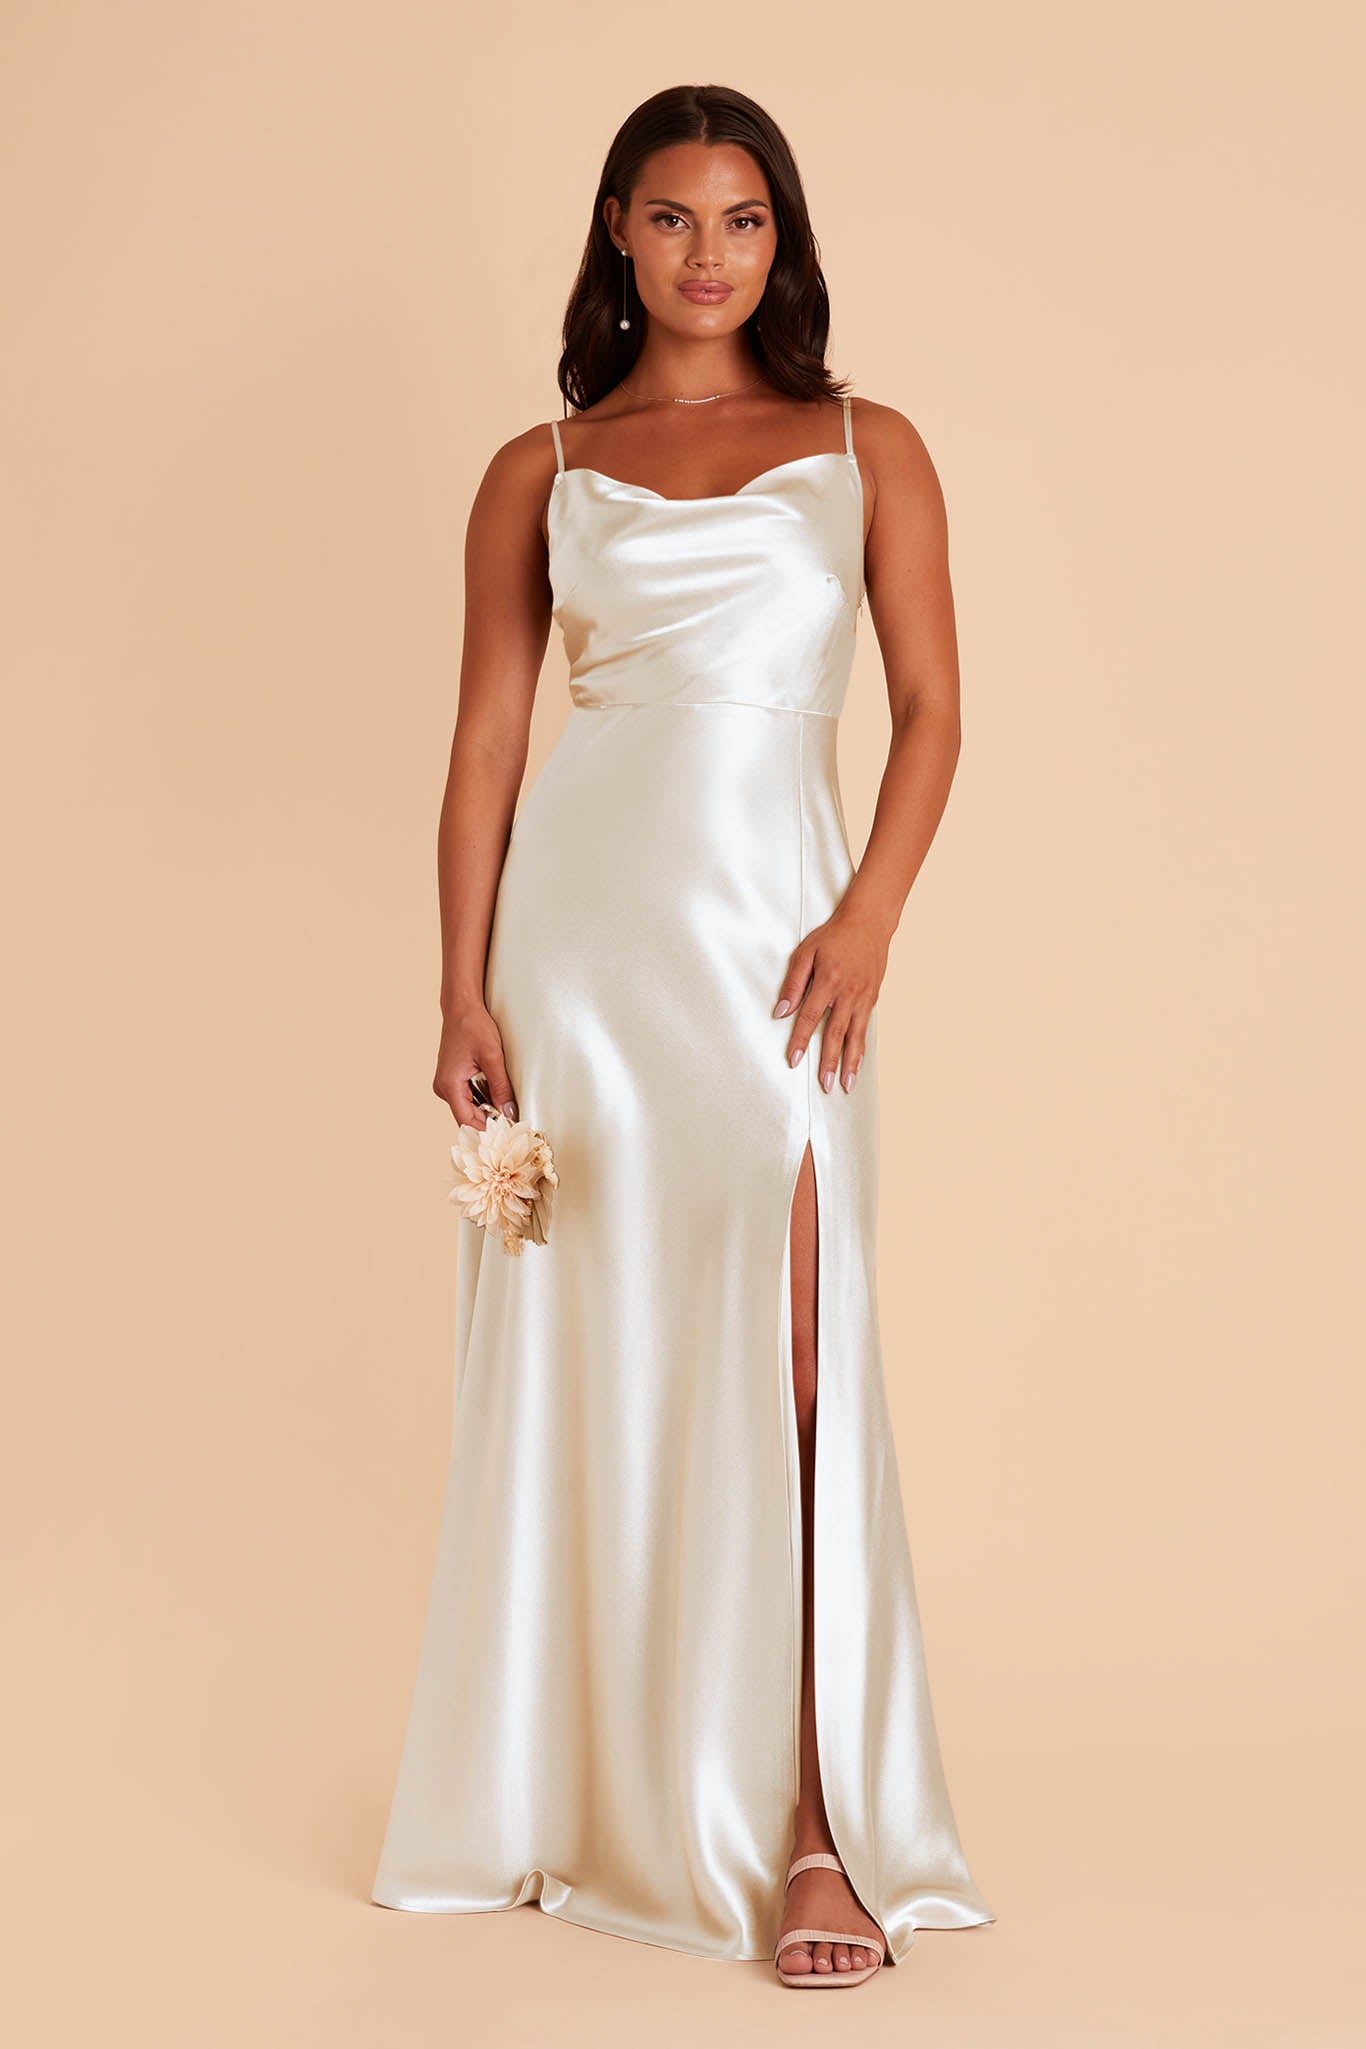 Minimalist white plain off the shoulder satin ball gown wedding dress with  train